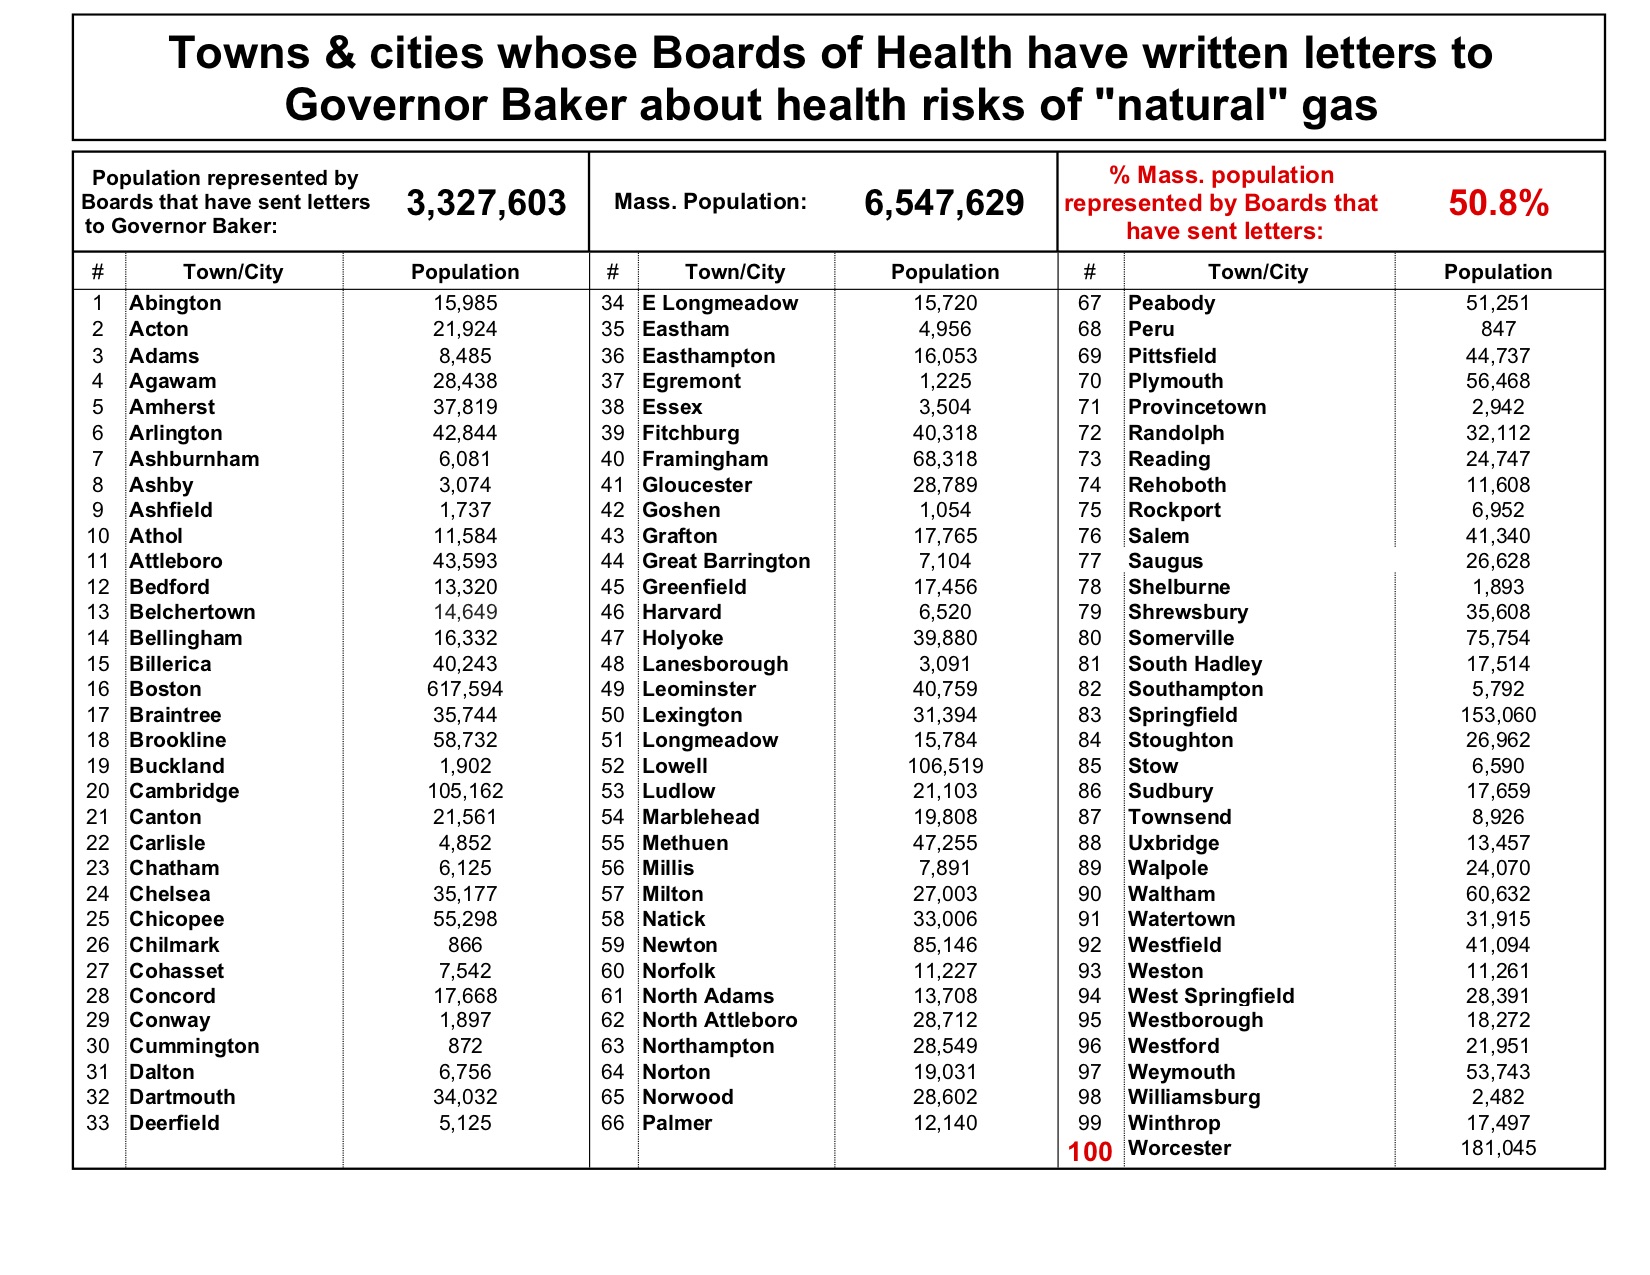 Towns & CIties whose Board of Health have contacted Governor Baker about health risks of natural gas